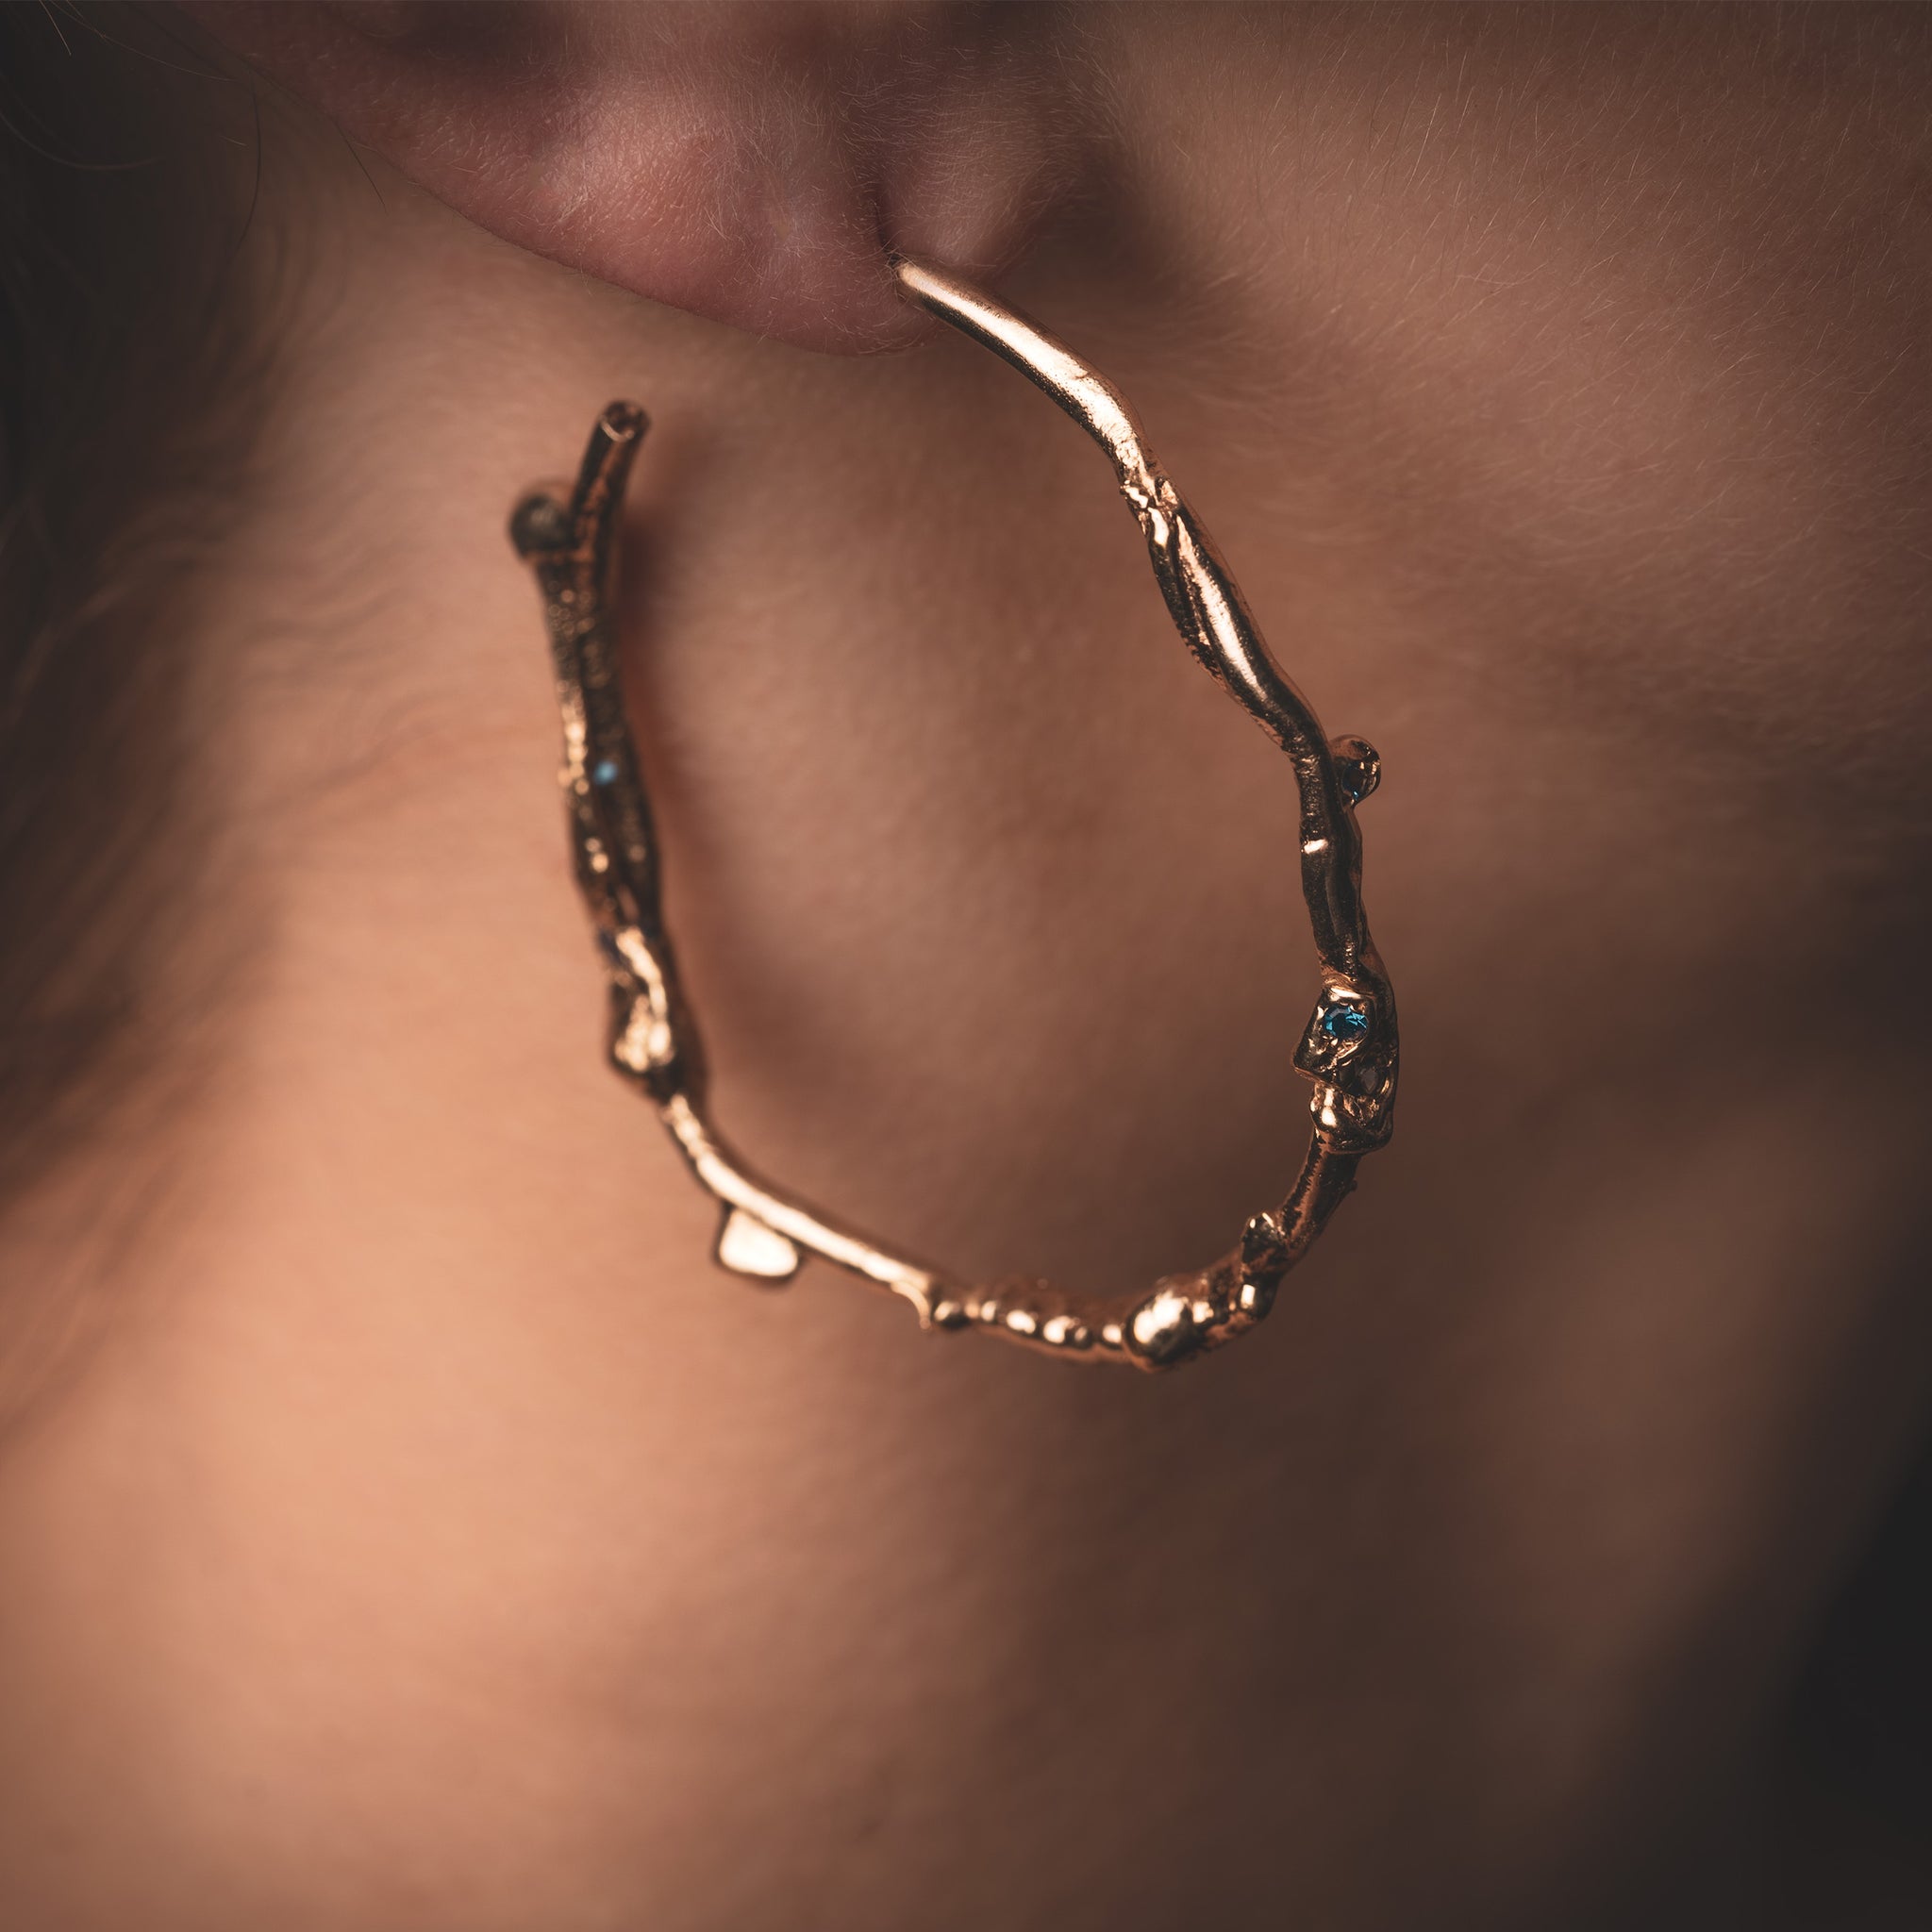 Taormina Earrings in Gold By What If You Stayed Jewelry